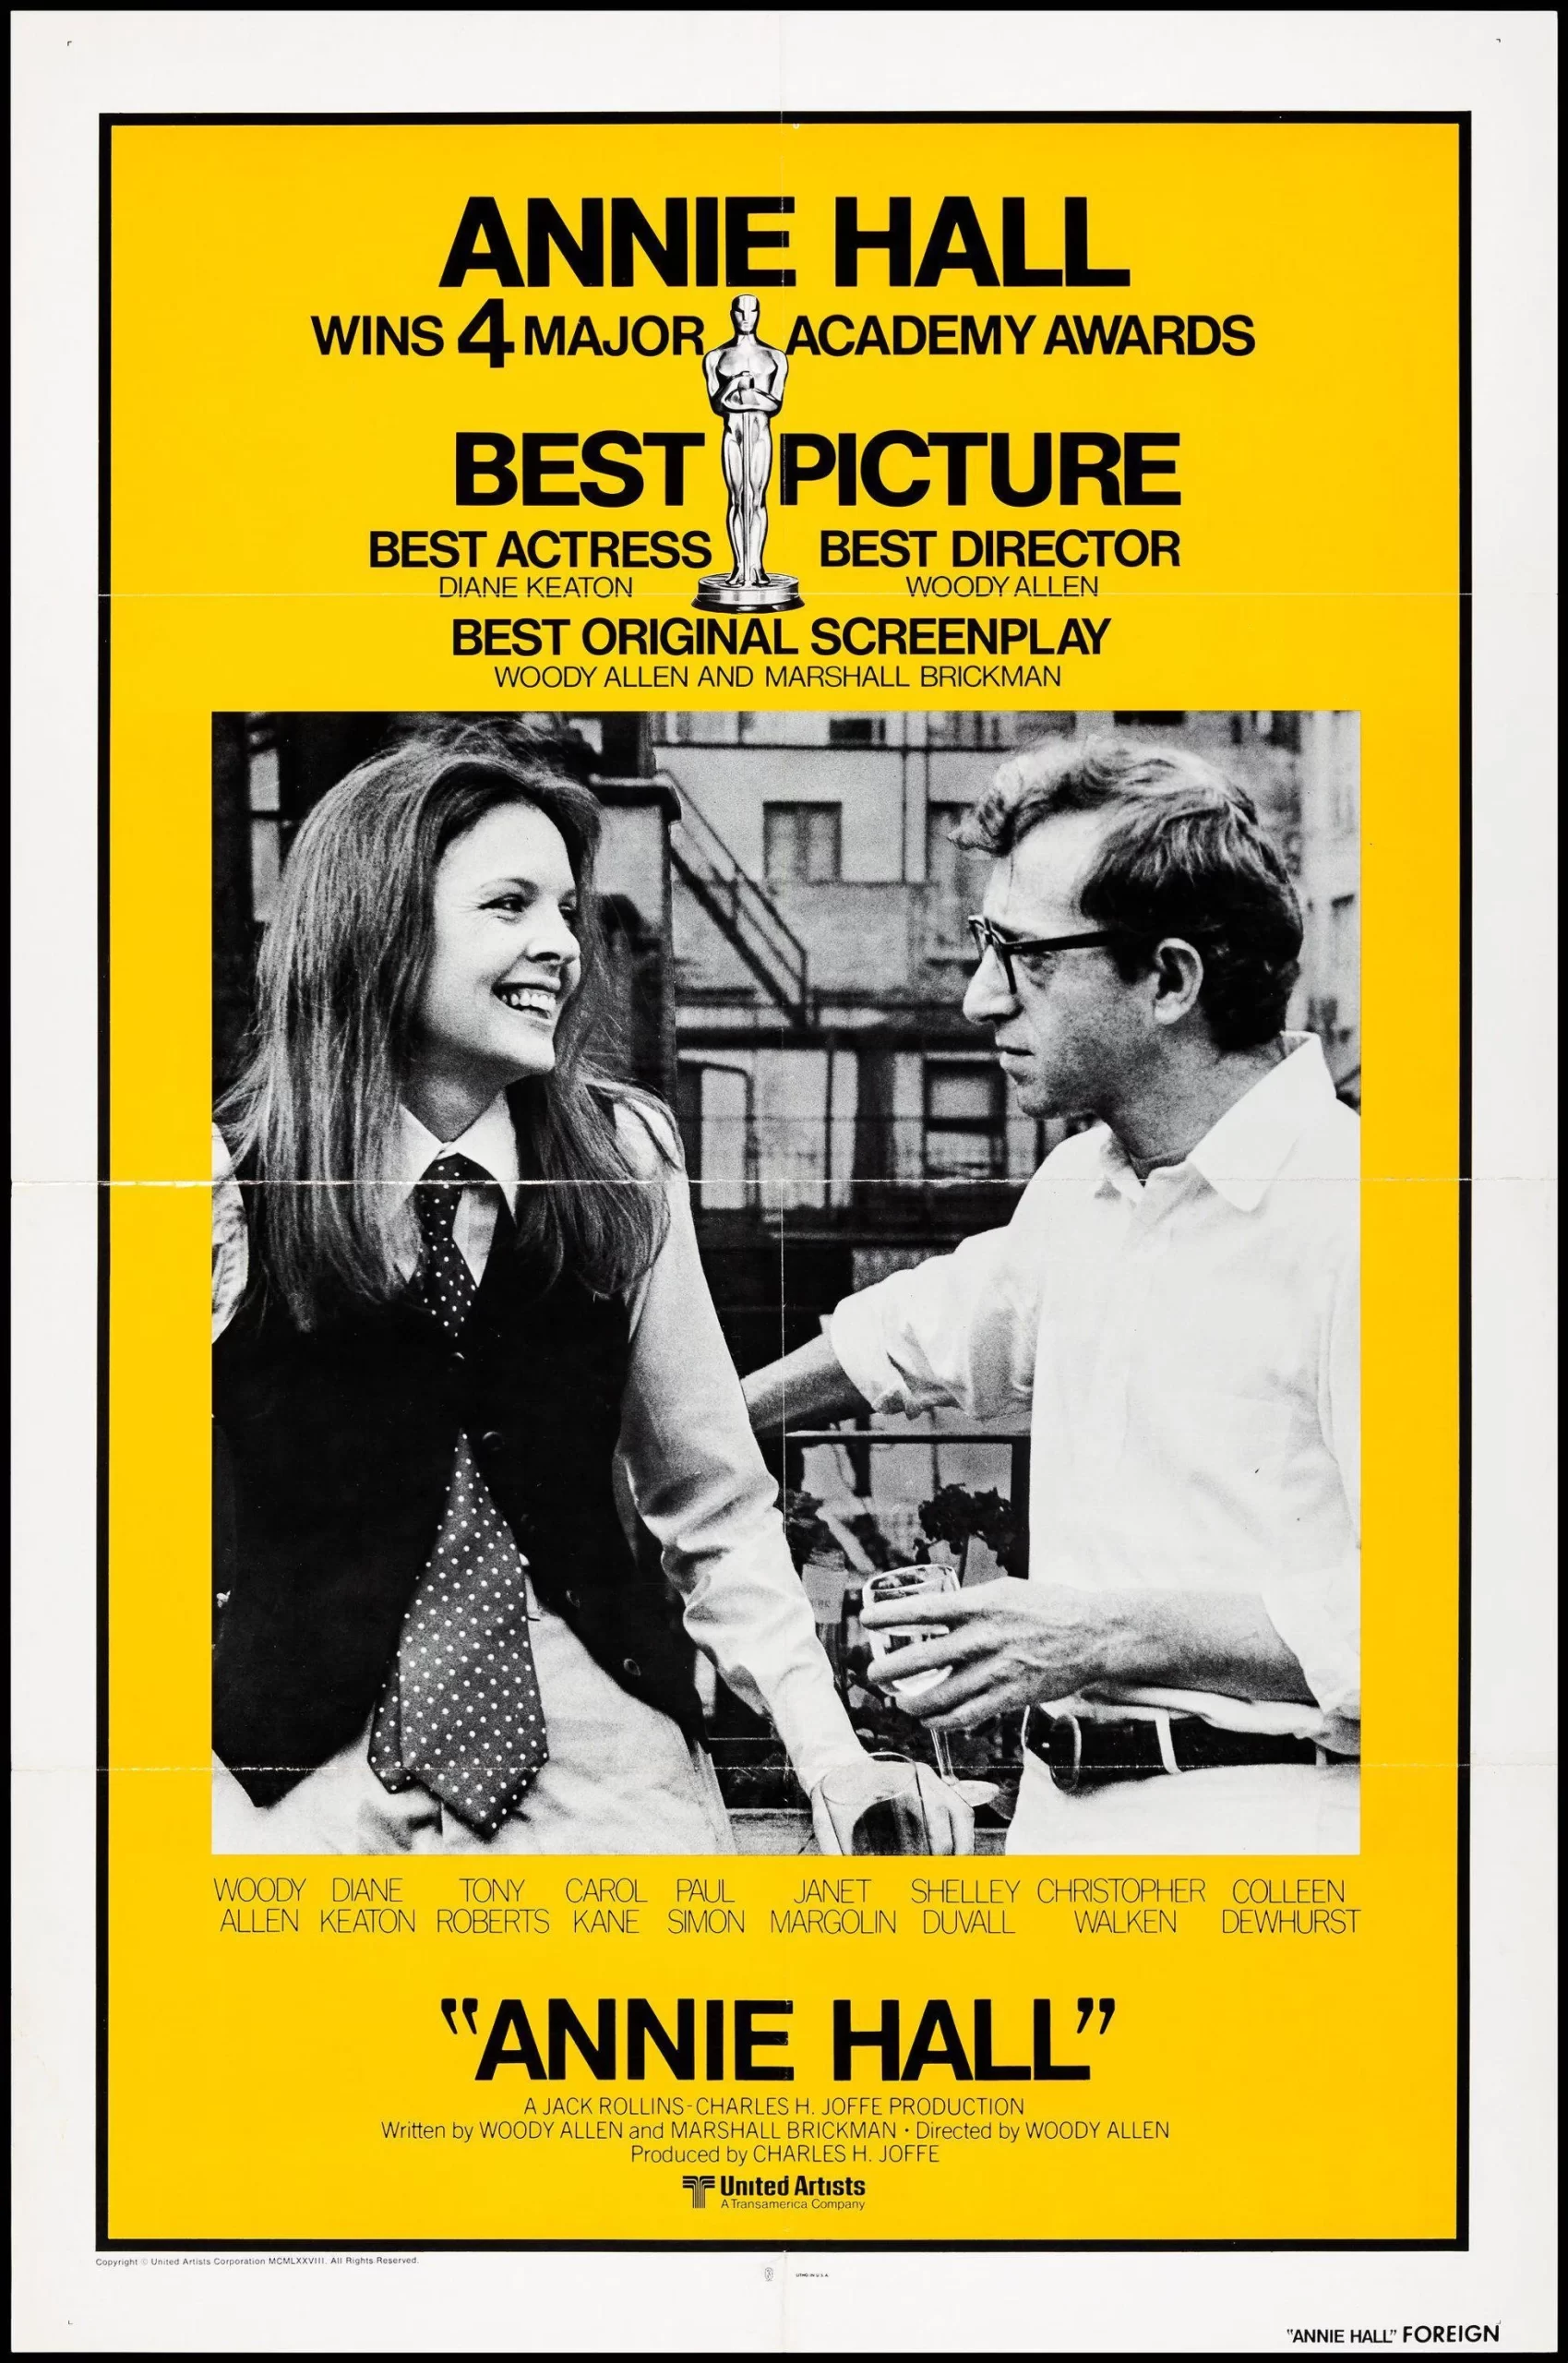 Vintage yellow movie-poster for Woody Allen's "Annie Hall".